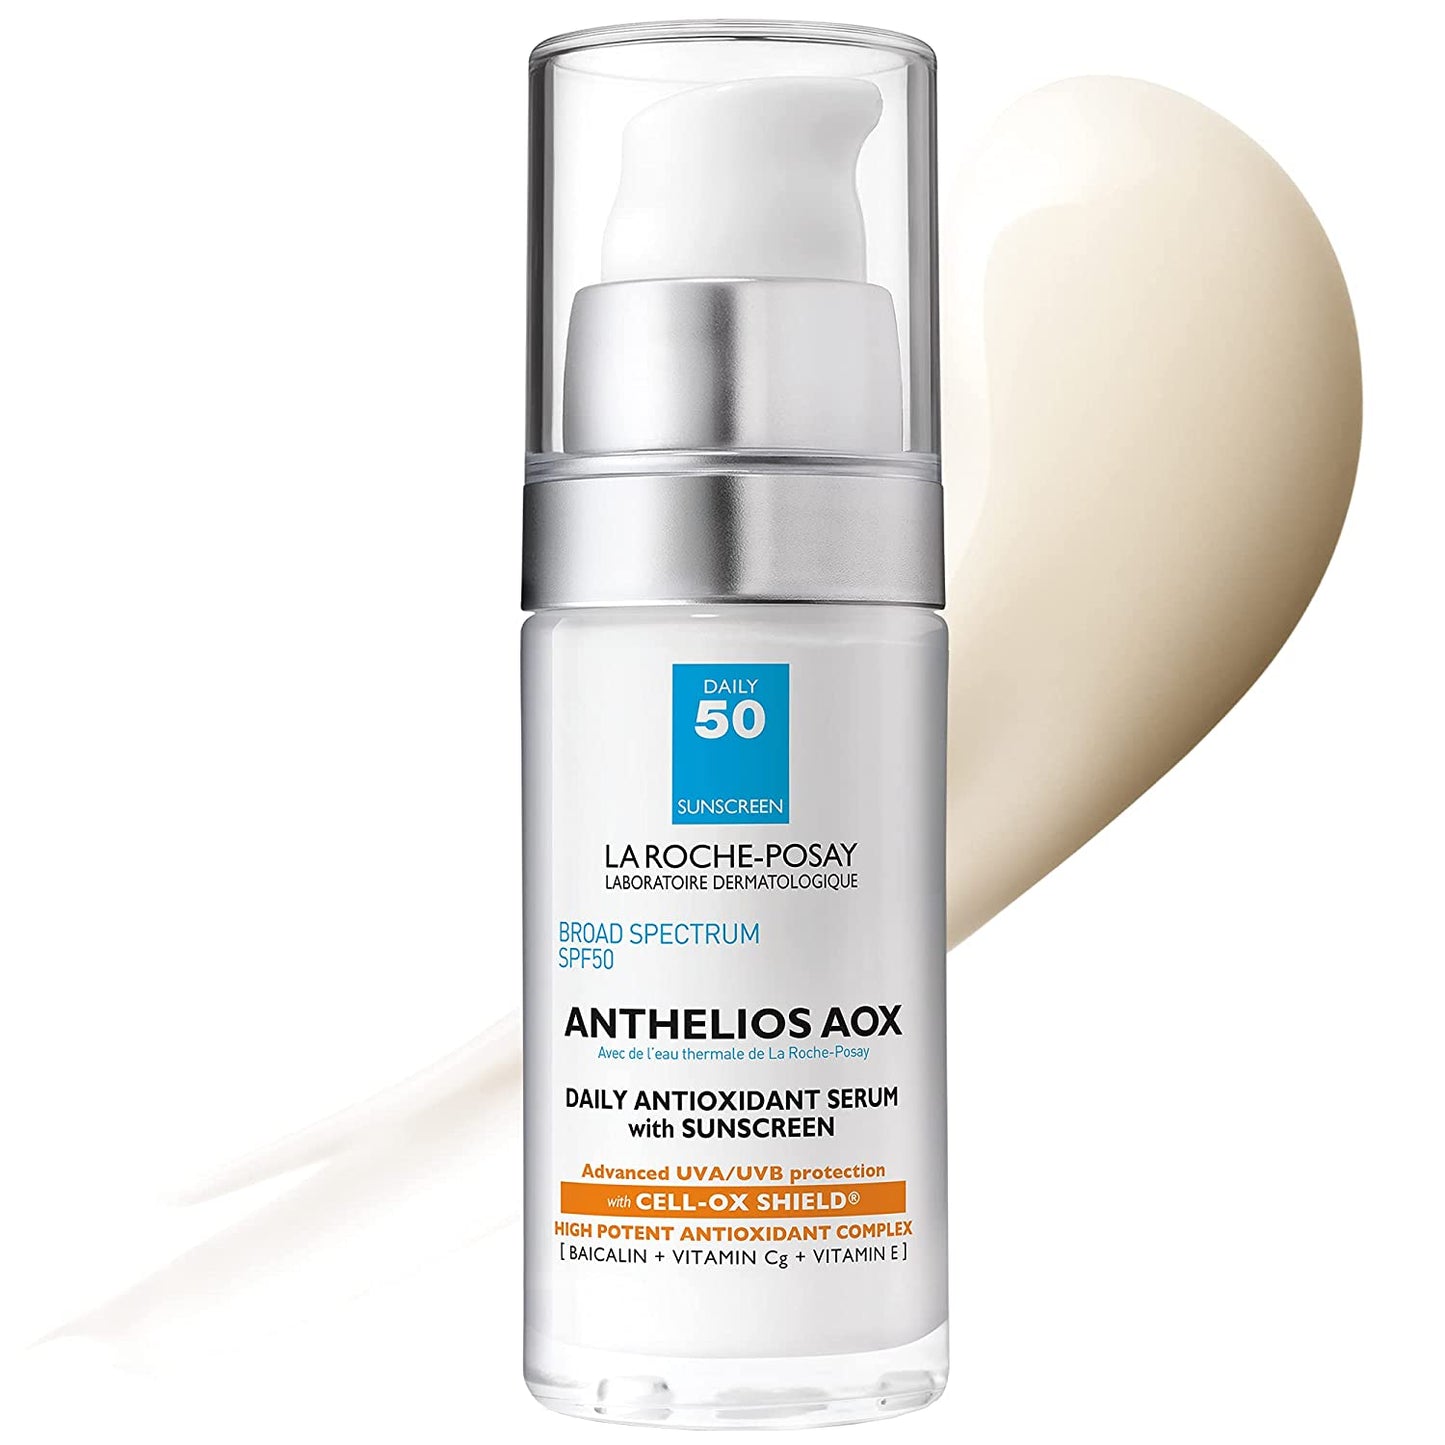 Anthelios AOX serum with suncreen